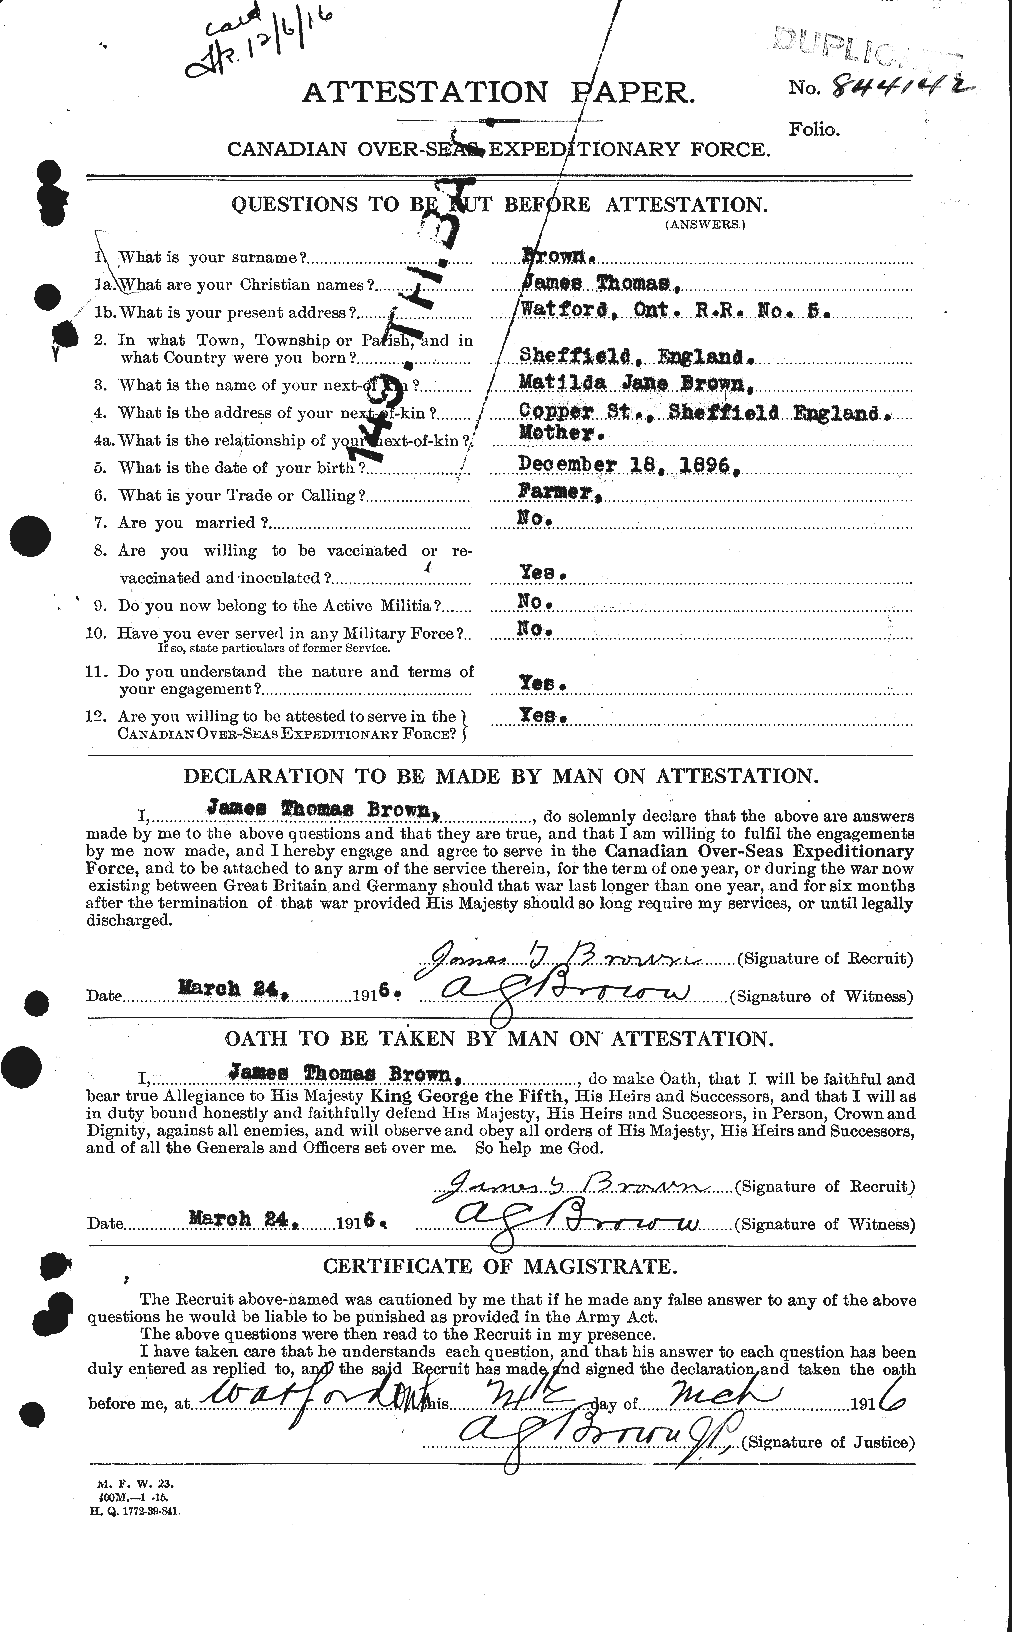 Personnel Records of the First World War - CEF 269590a